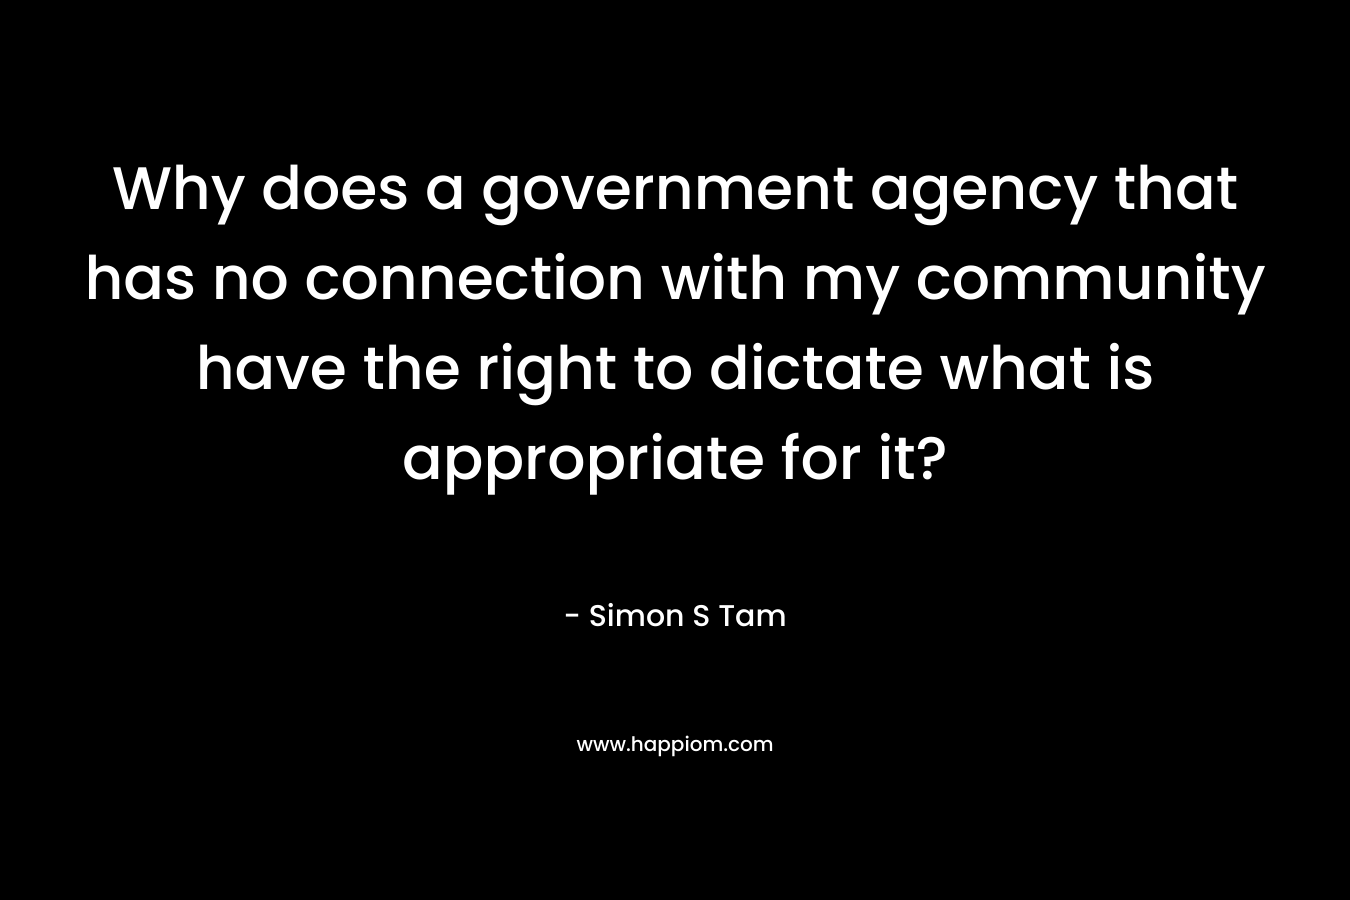 Why does a government agency that has no connection with my community have the right to dictate what is appropriate for it? – Simon S Tam